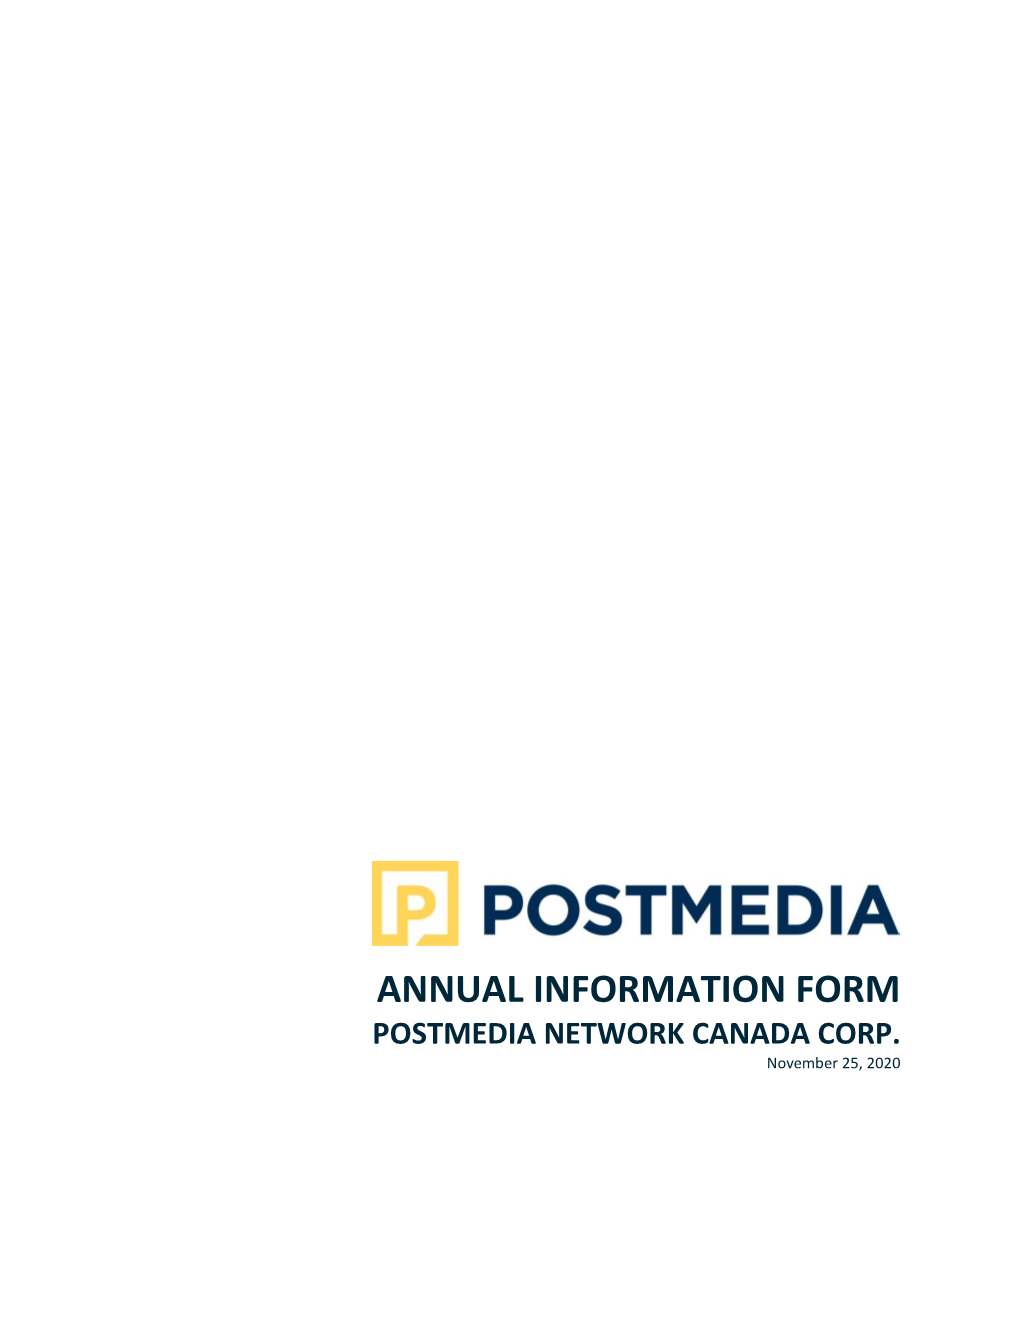 Annual Information Form Postmedia Network Canada Corp